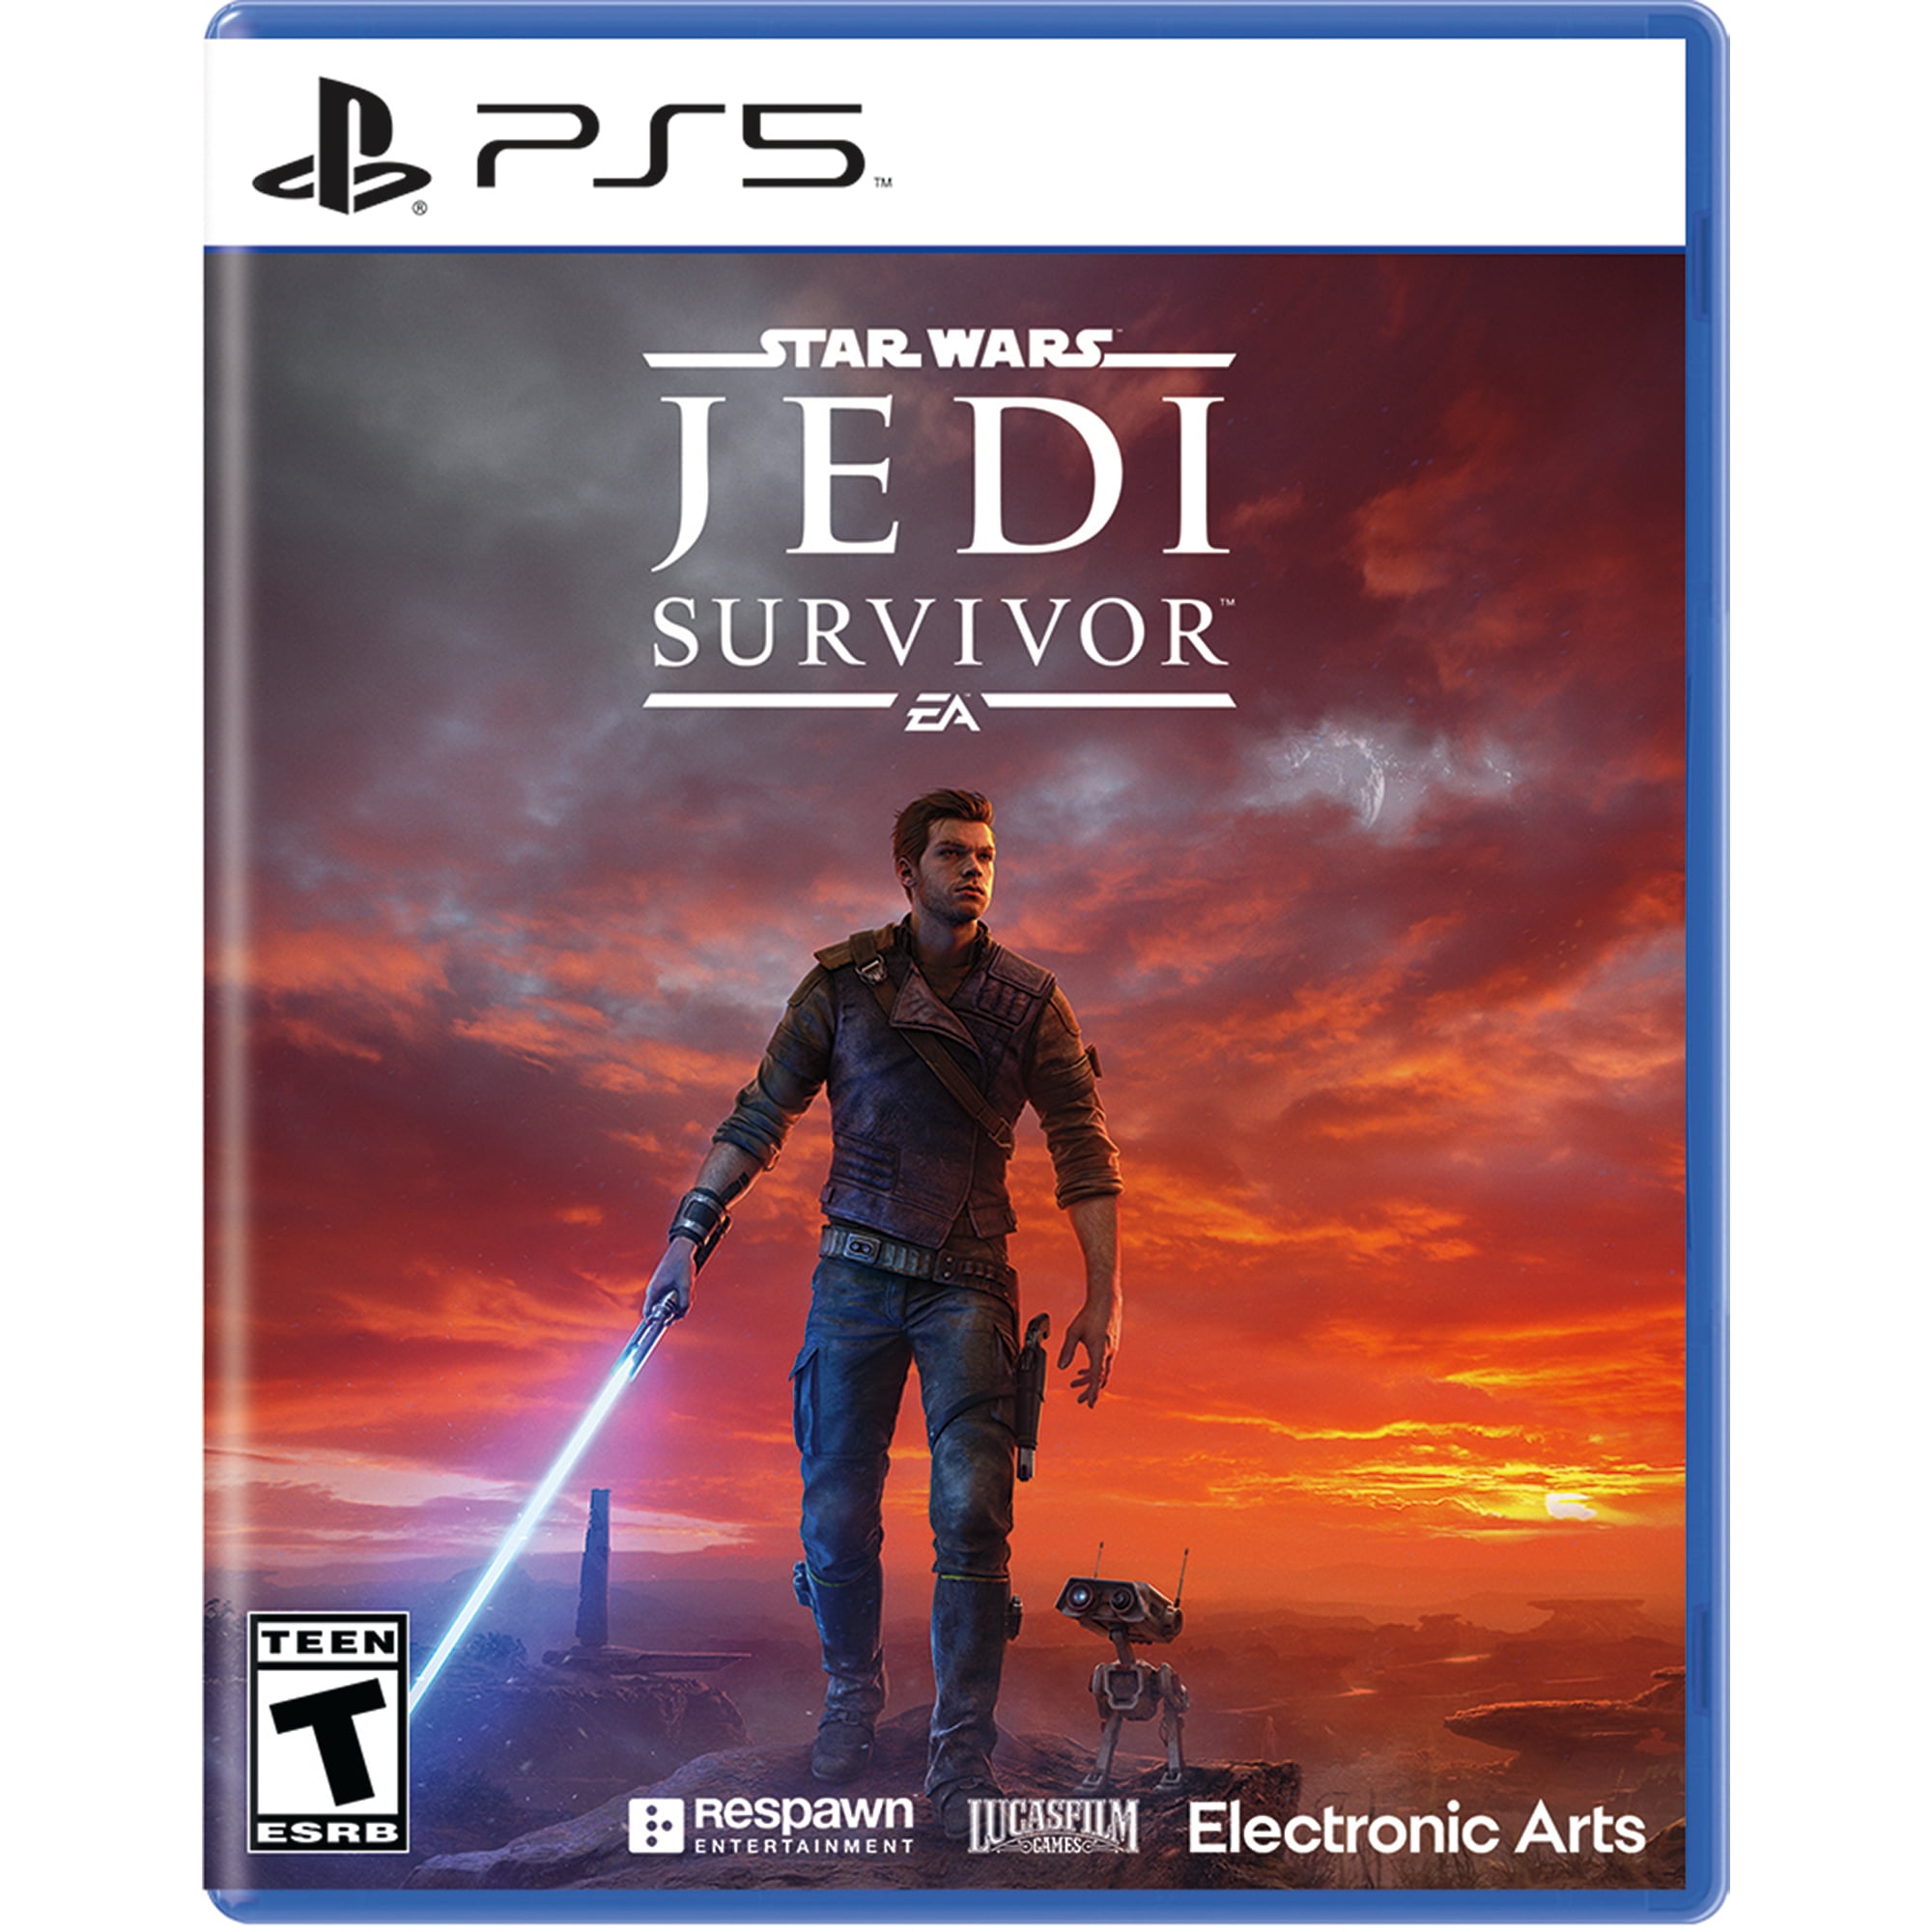 STAR WARS Jedi: Survivor™ – Available now on PC, PlayStation and